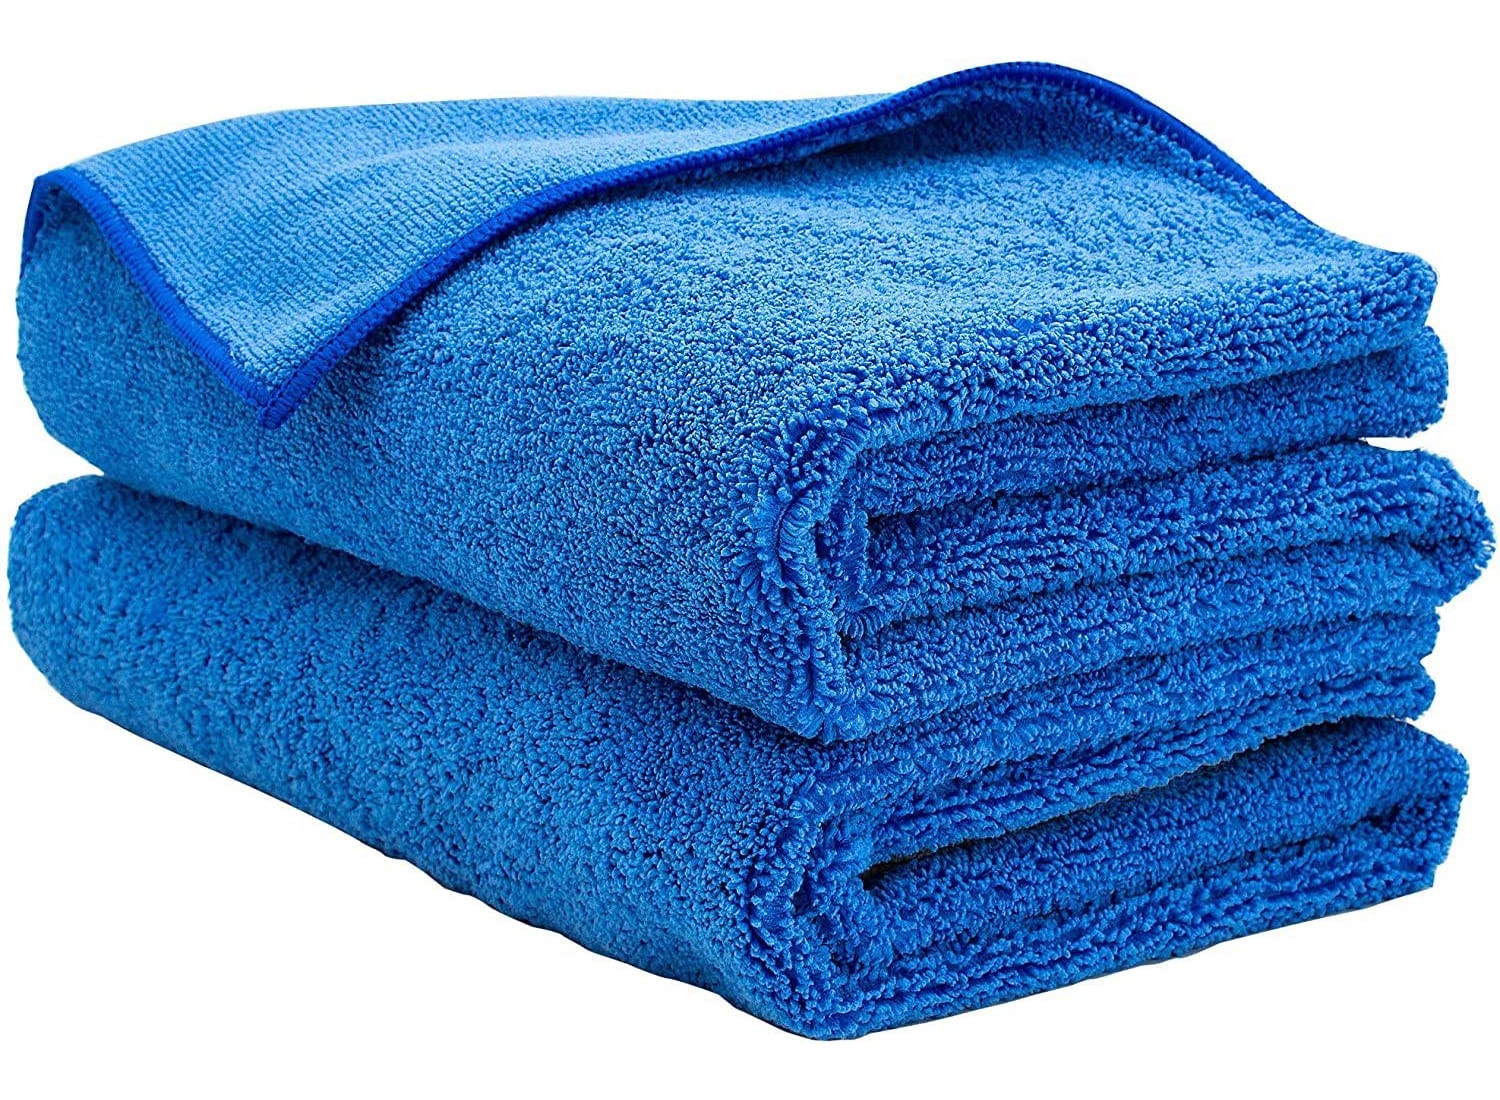 KinHwa Microfibre Car Cleaning Cloths Dual Pile Terry Weave Car Drying Towel Ultra Absorbent Car Detailing Cloths Scratch Free Car Wash Towels blue, 16inchx16inch 